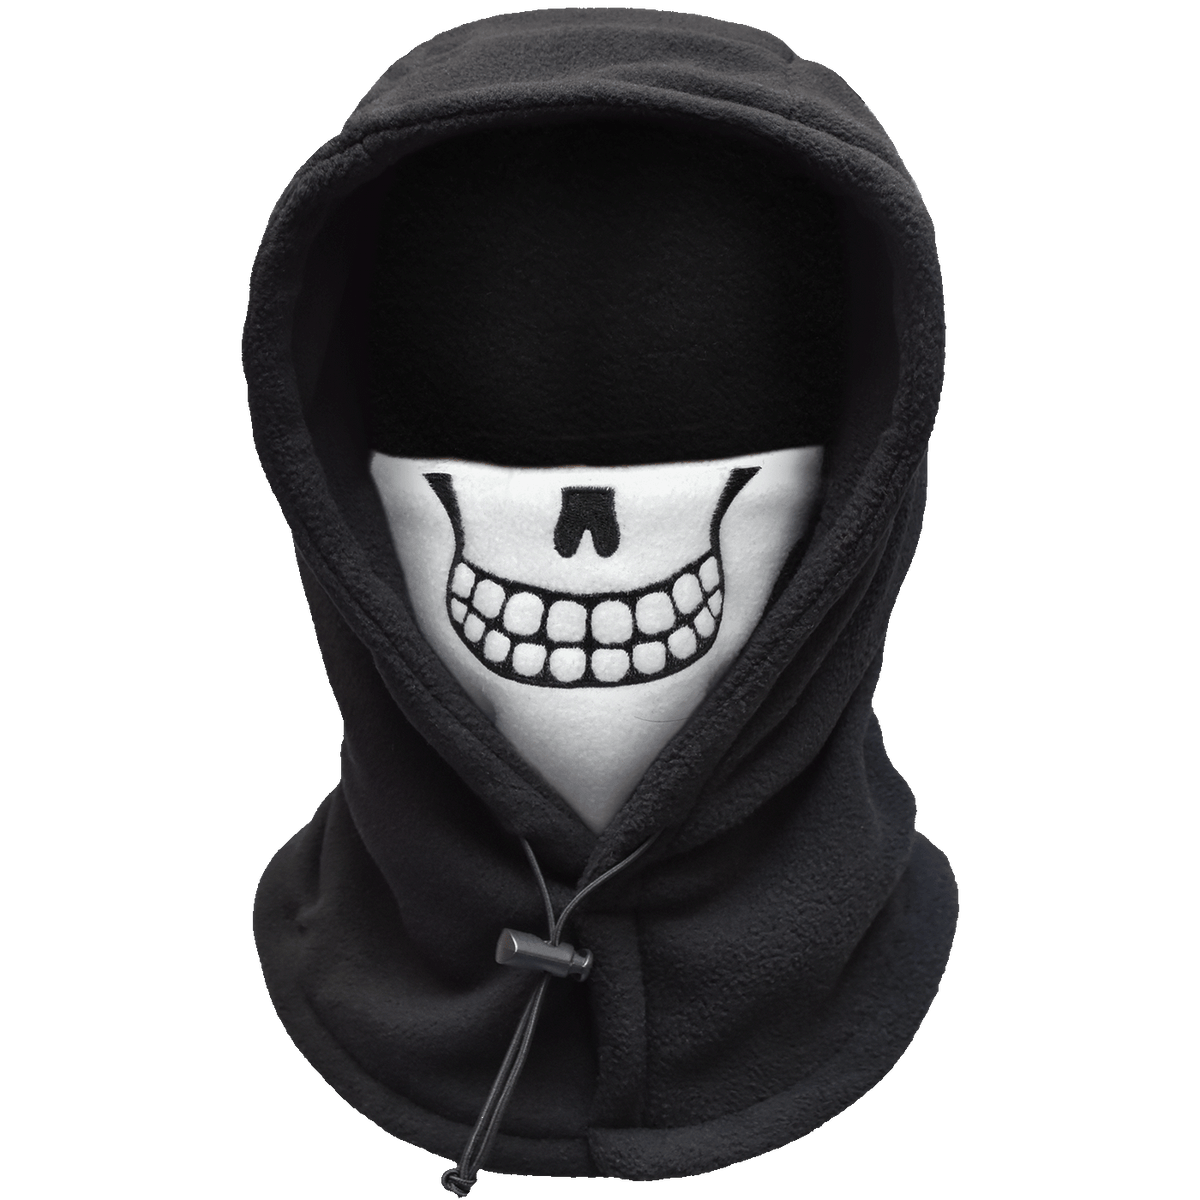 Kids Balaclava Ski Mask, Washable Fleece Winter Hat with Face Cover for Windproof, Skull